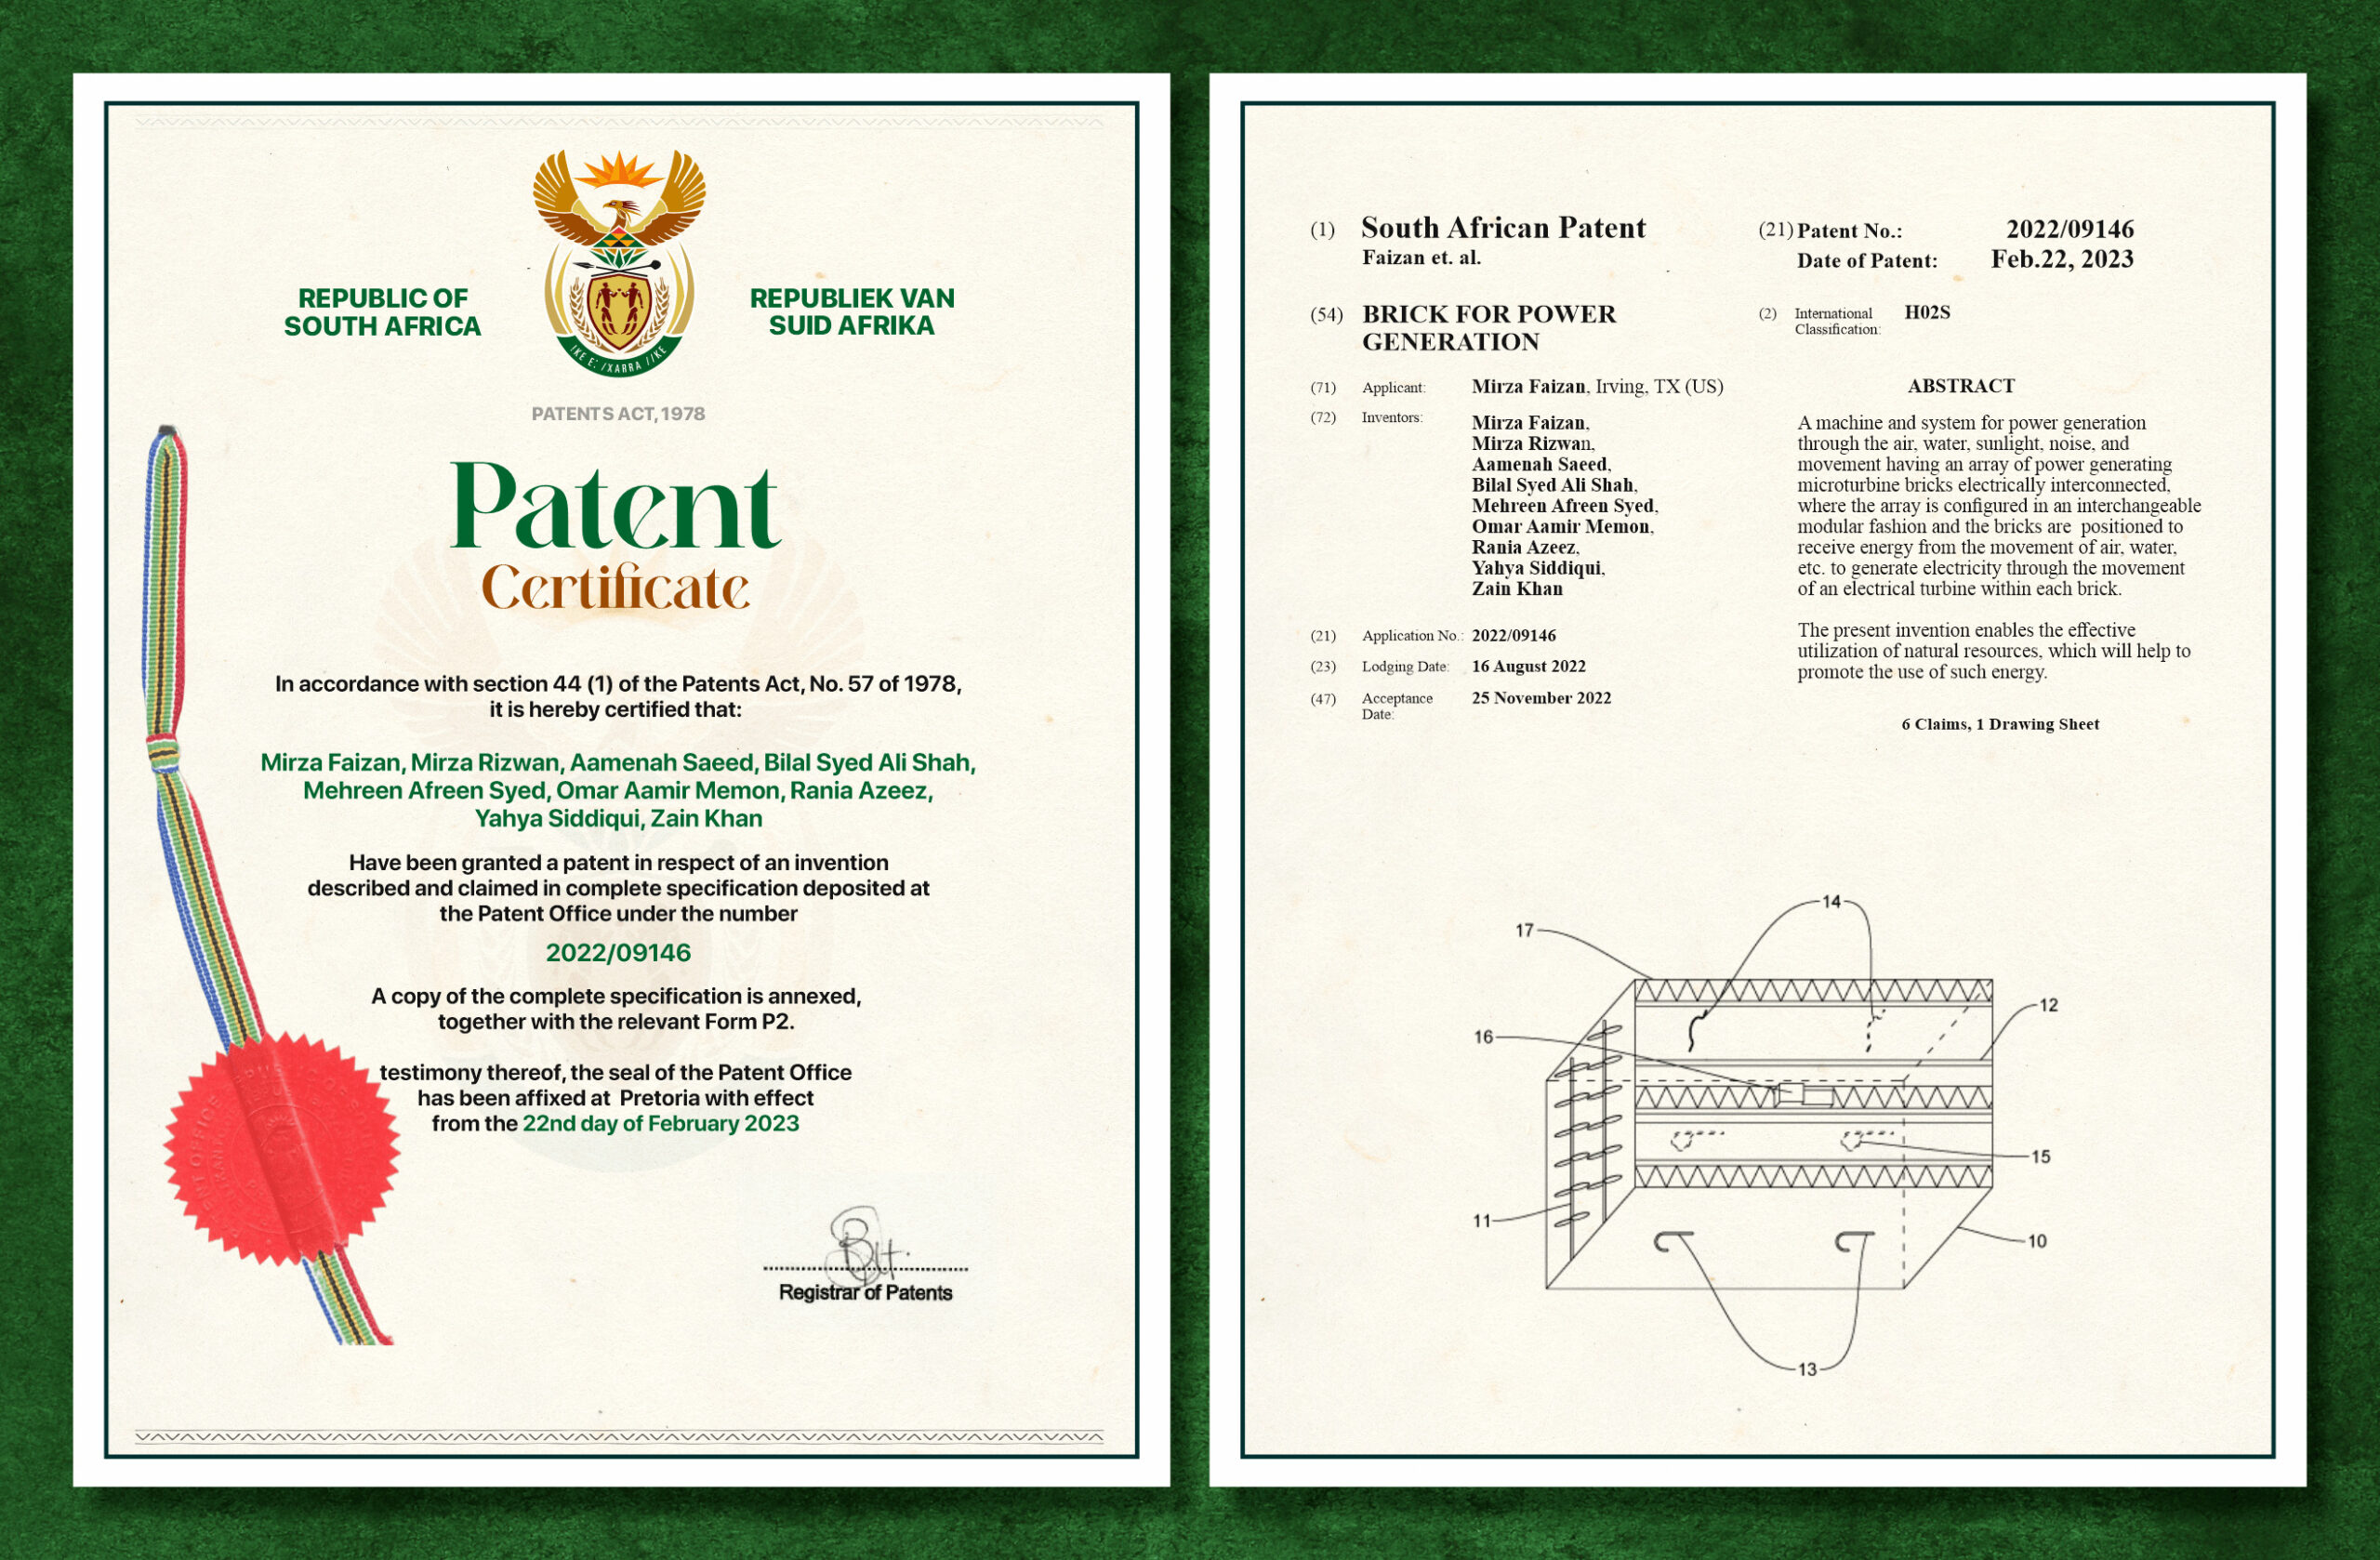 SA Patent Certificate Electricity generating tiles using micro-turbines for air and water South African Patent No.: 2022/09146